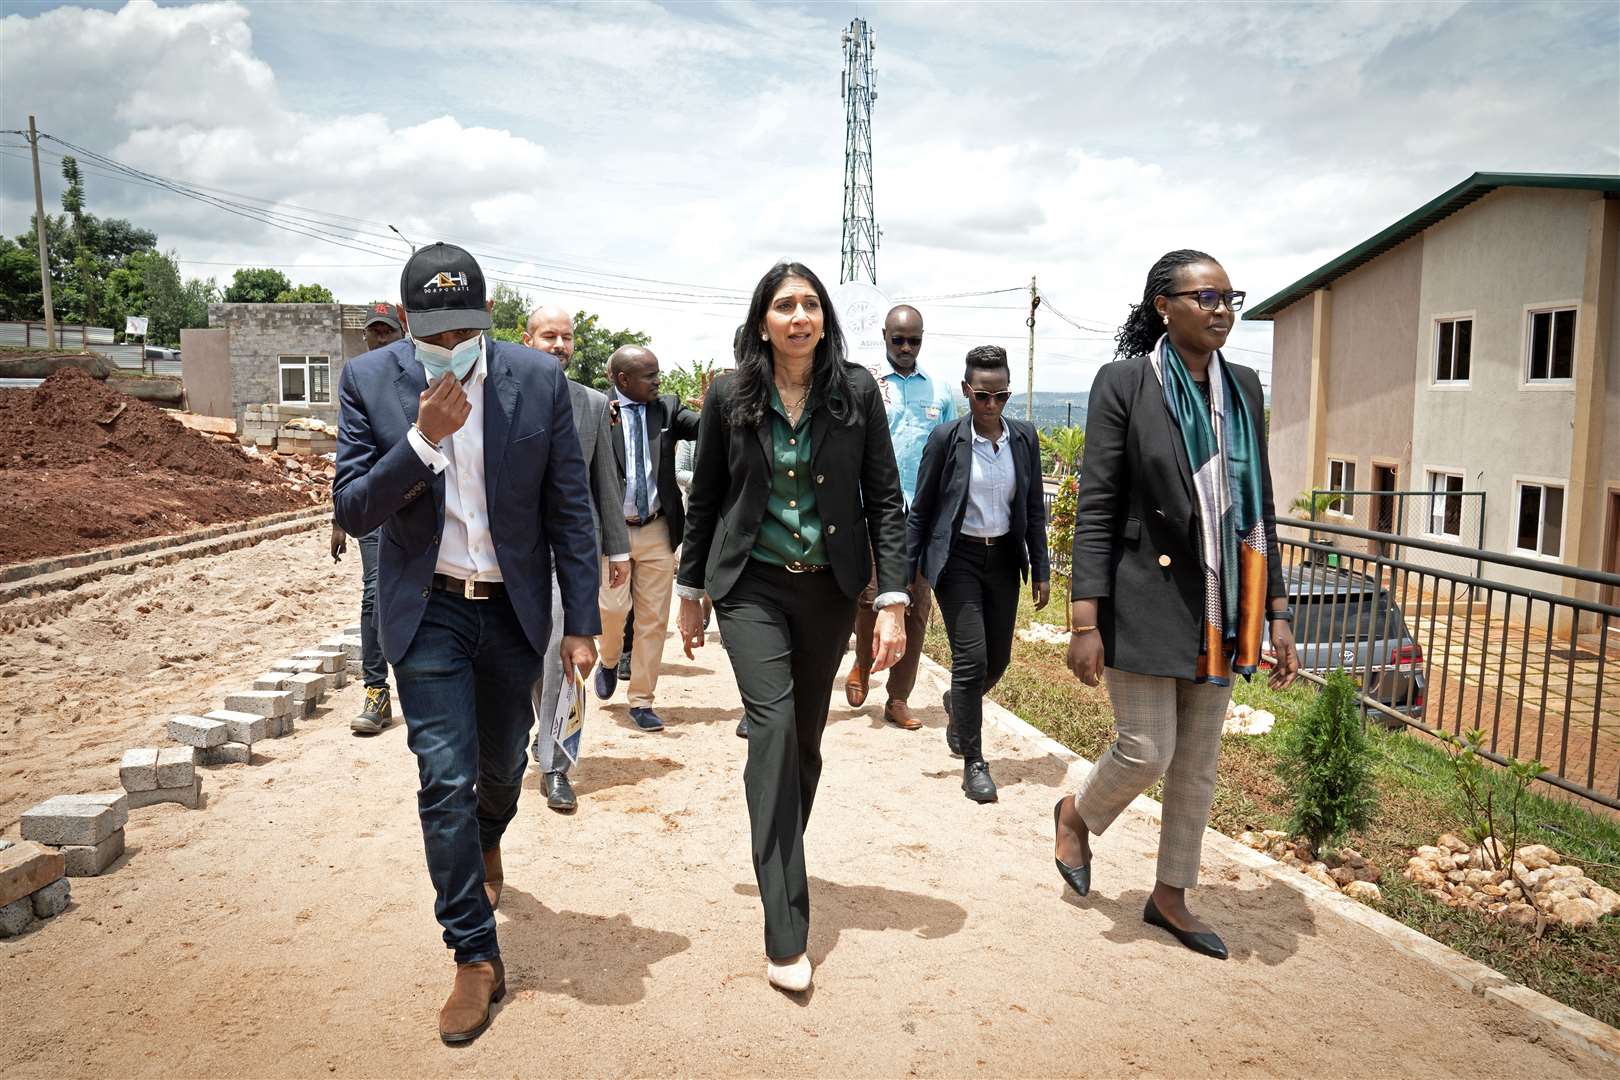 Home Secretary Suella Braverman touring a building site in Rwanda to see homes being constructed that could eventually house deported migrants (Stefan Rousseau/PA)